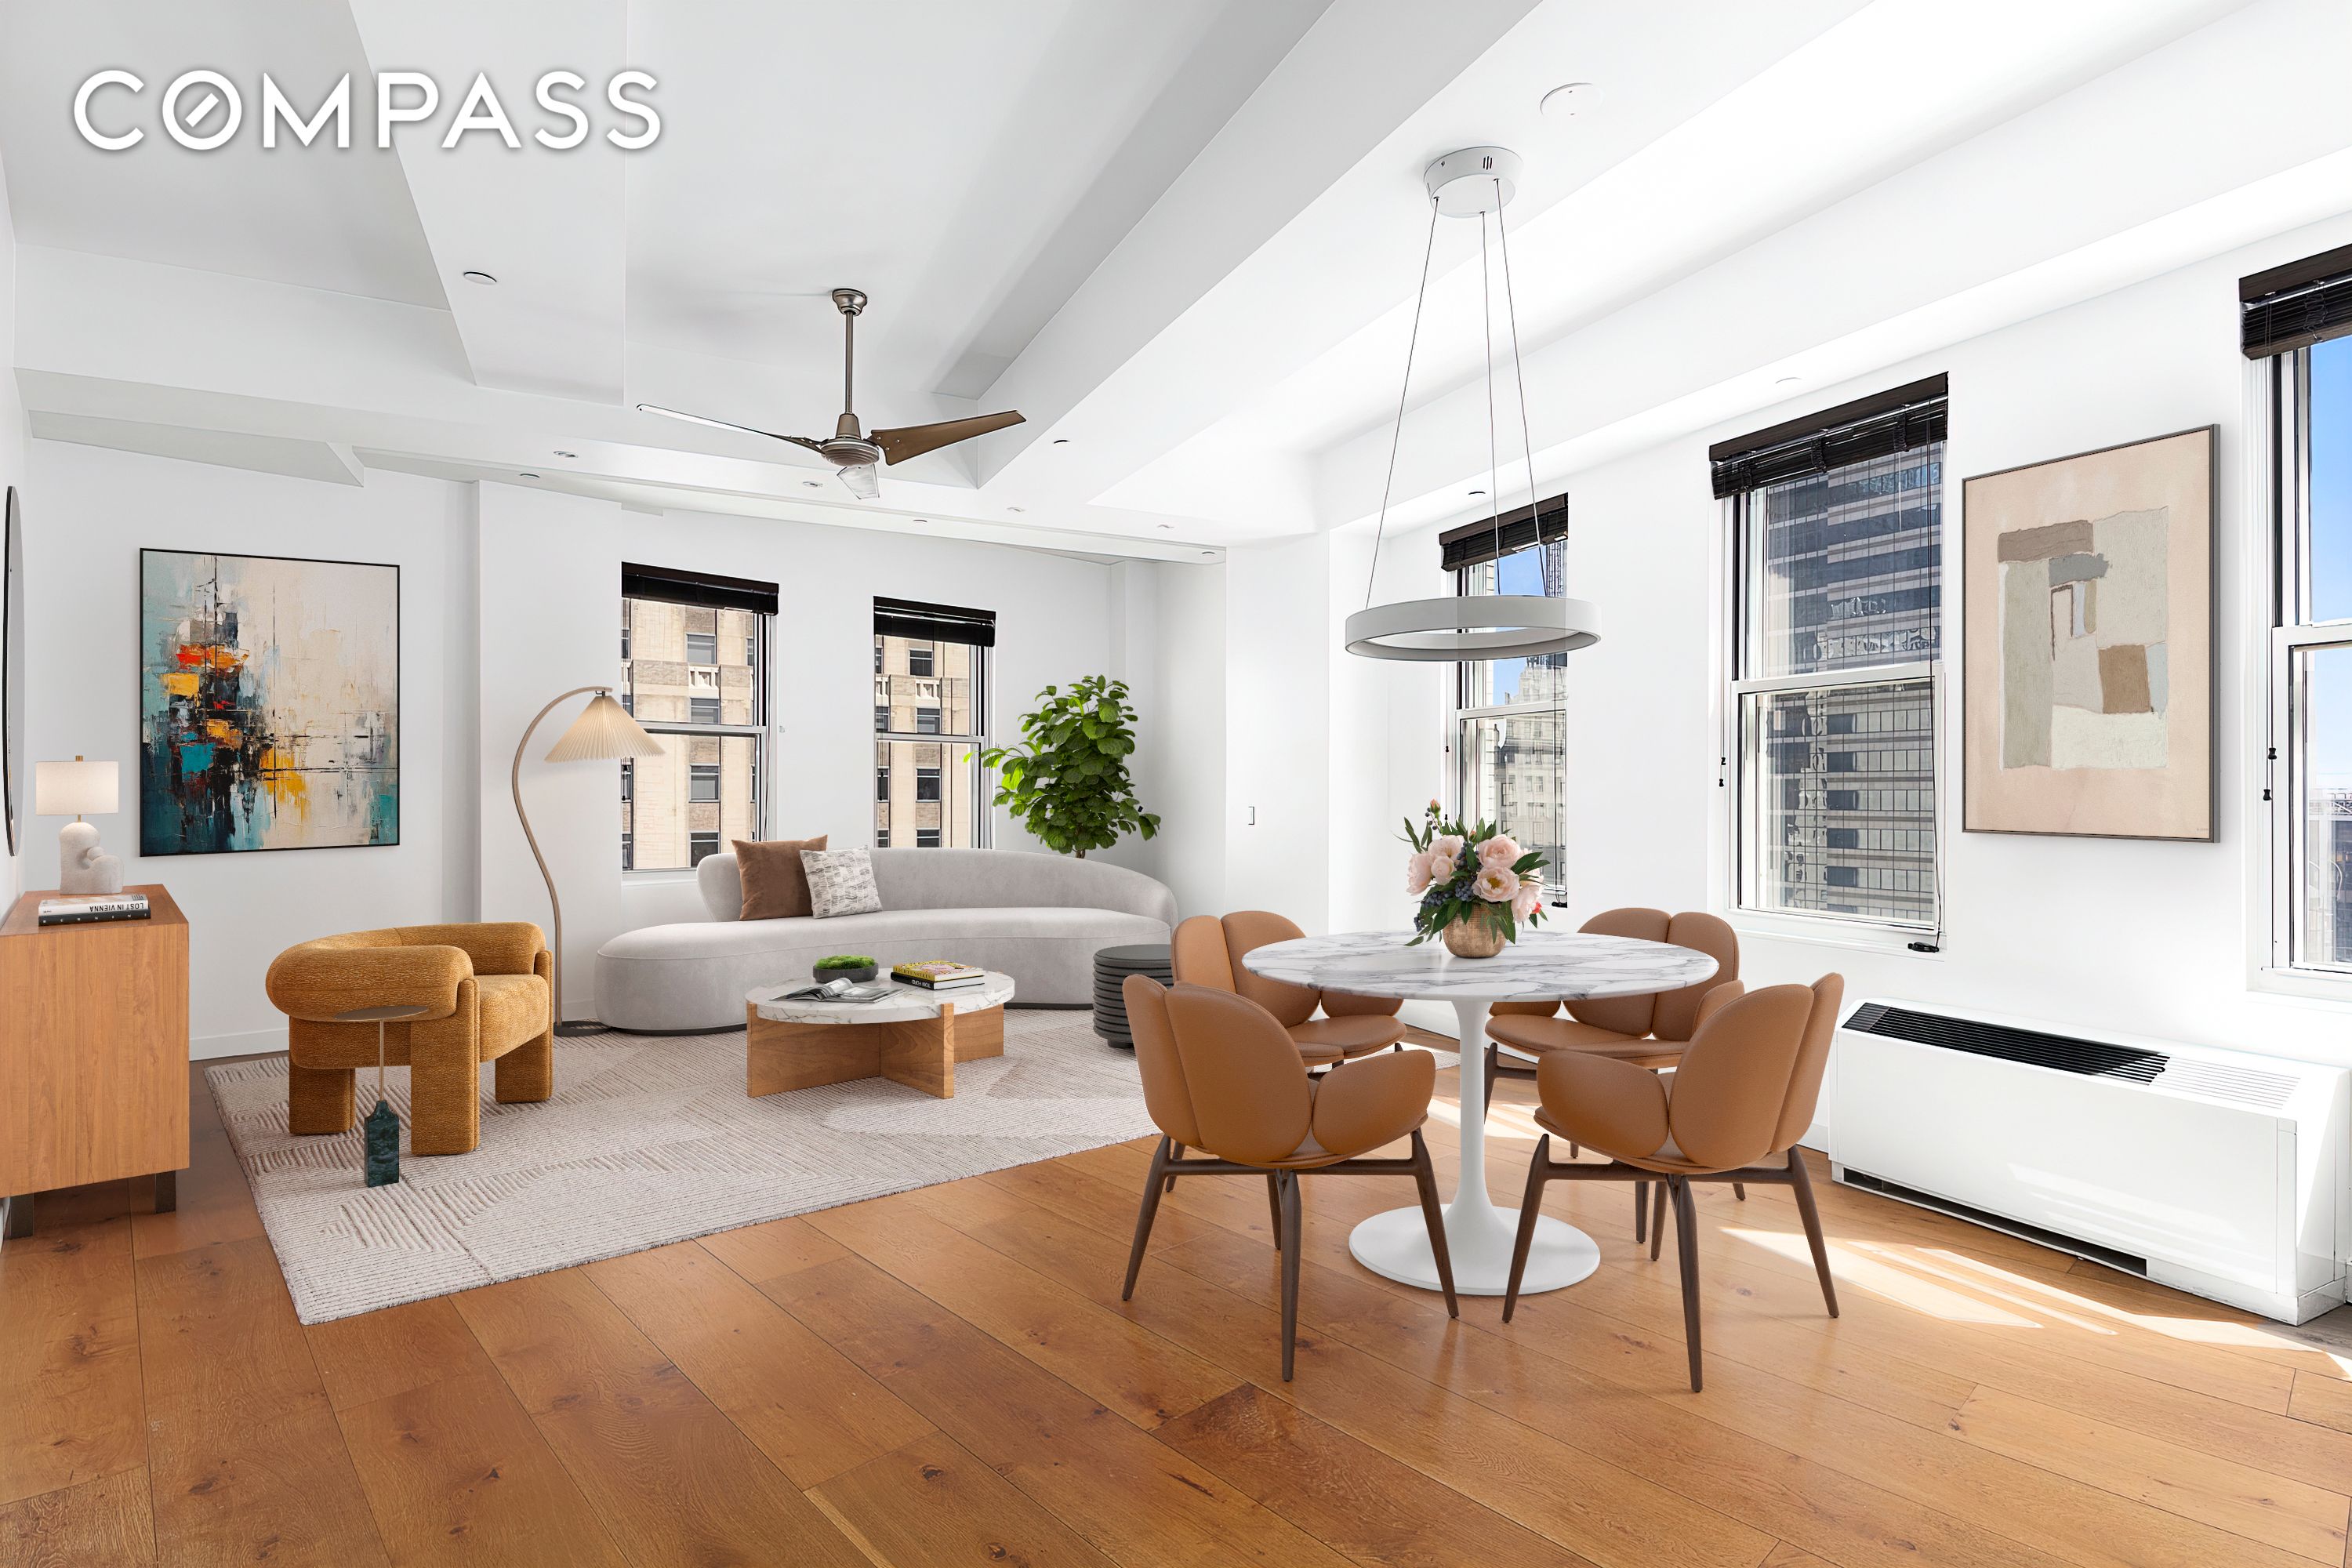 15 Broad Street 3200, Financial District, Downtown, NYC - 2 Bedrooms  
2 Bathrooms  
4 Rooms - 